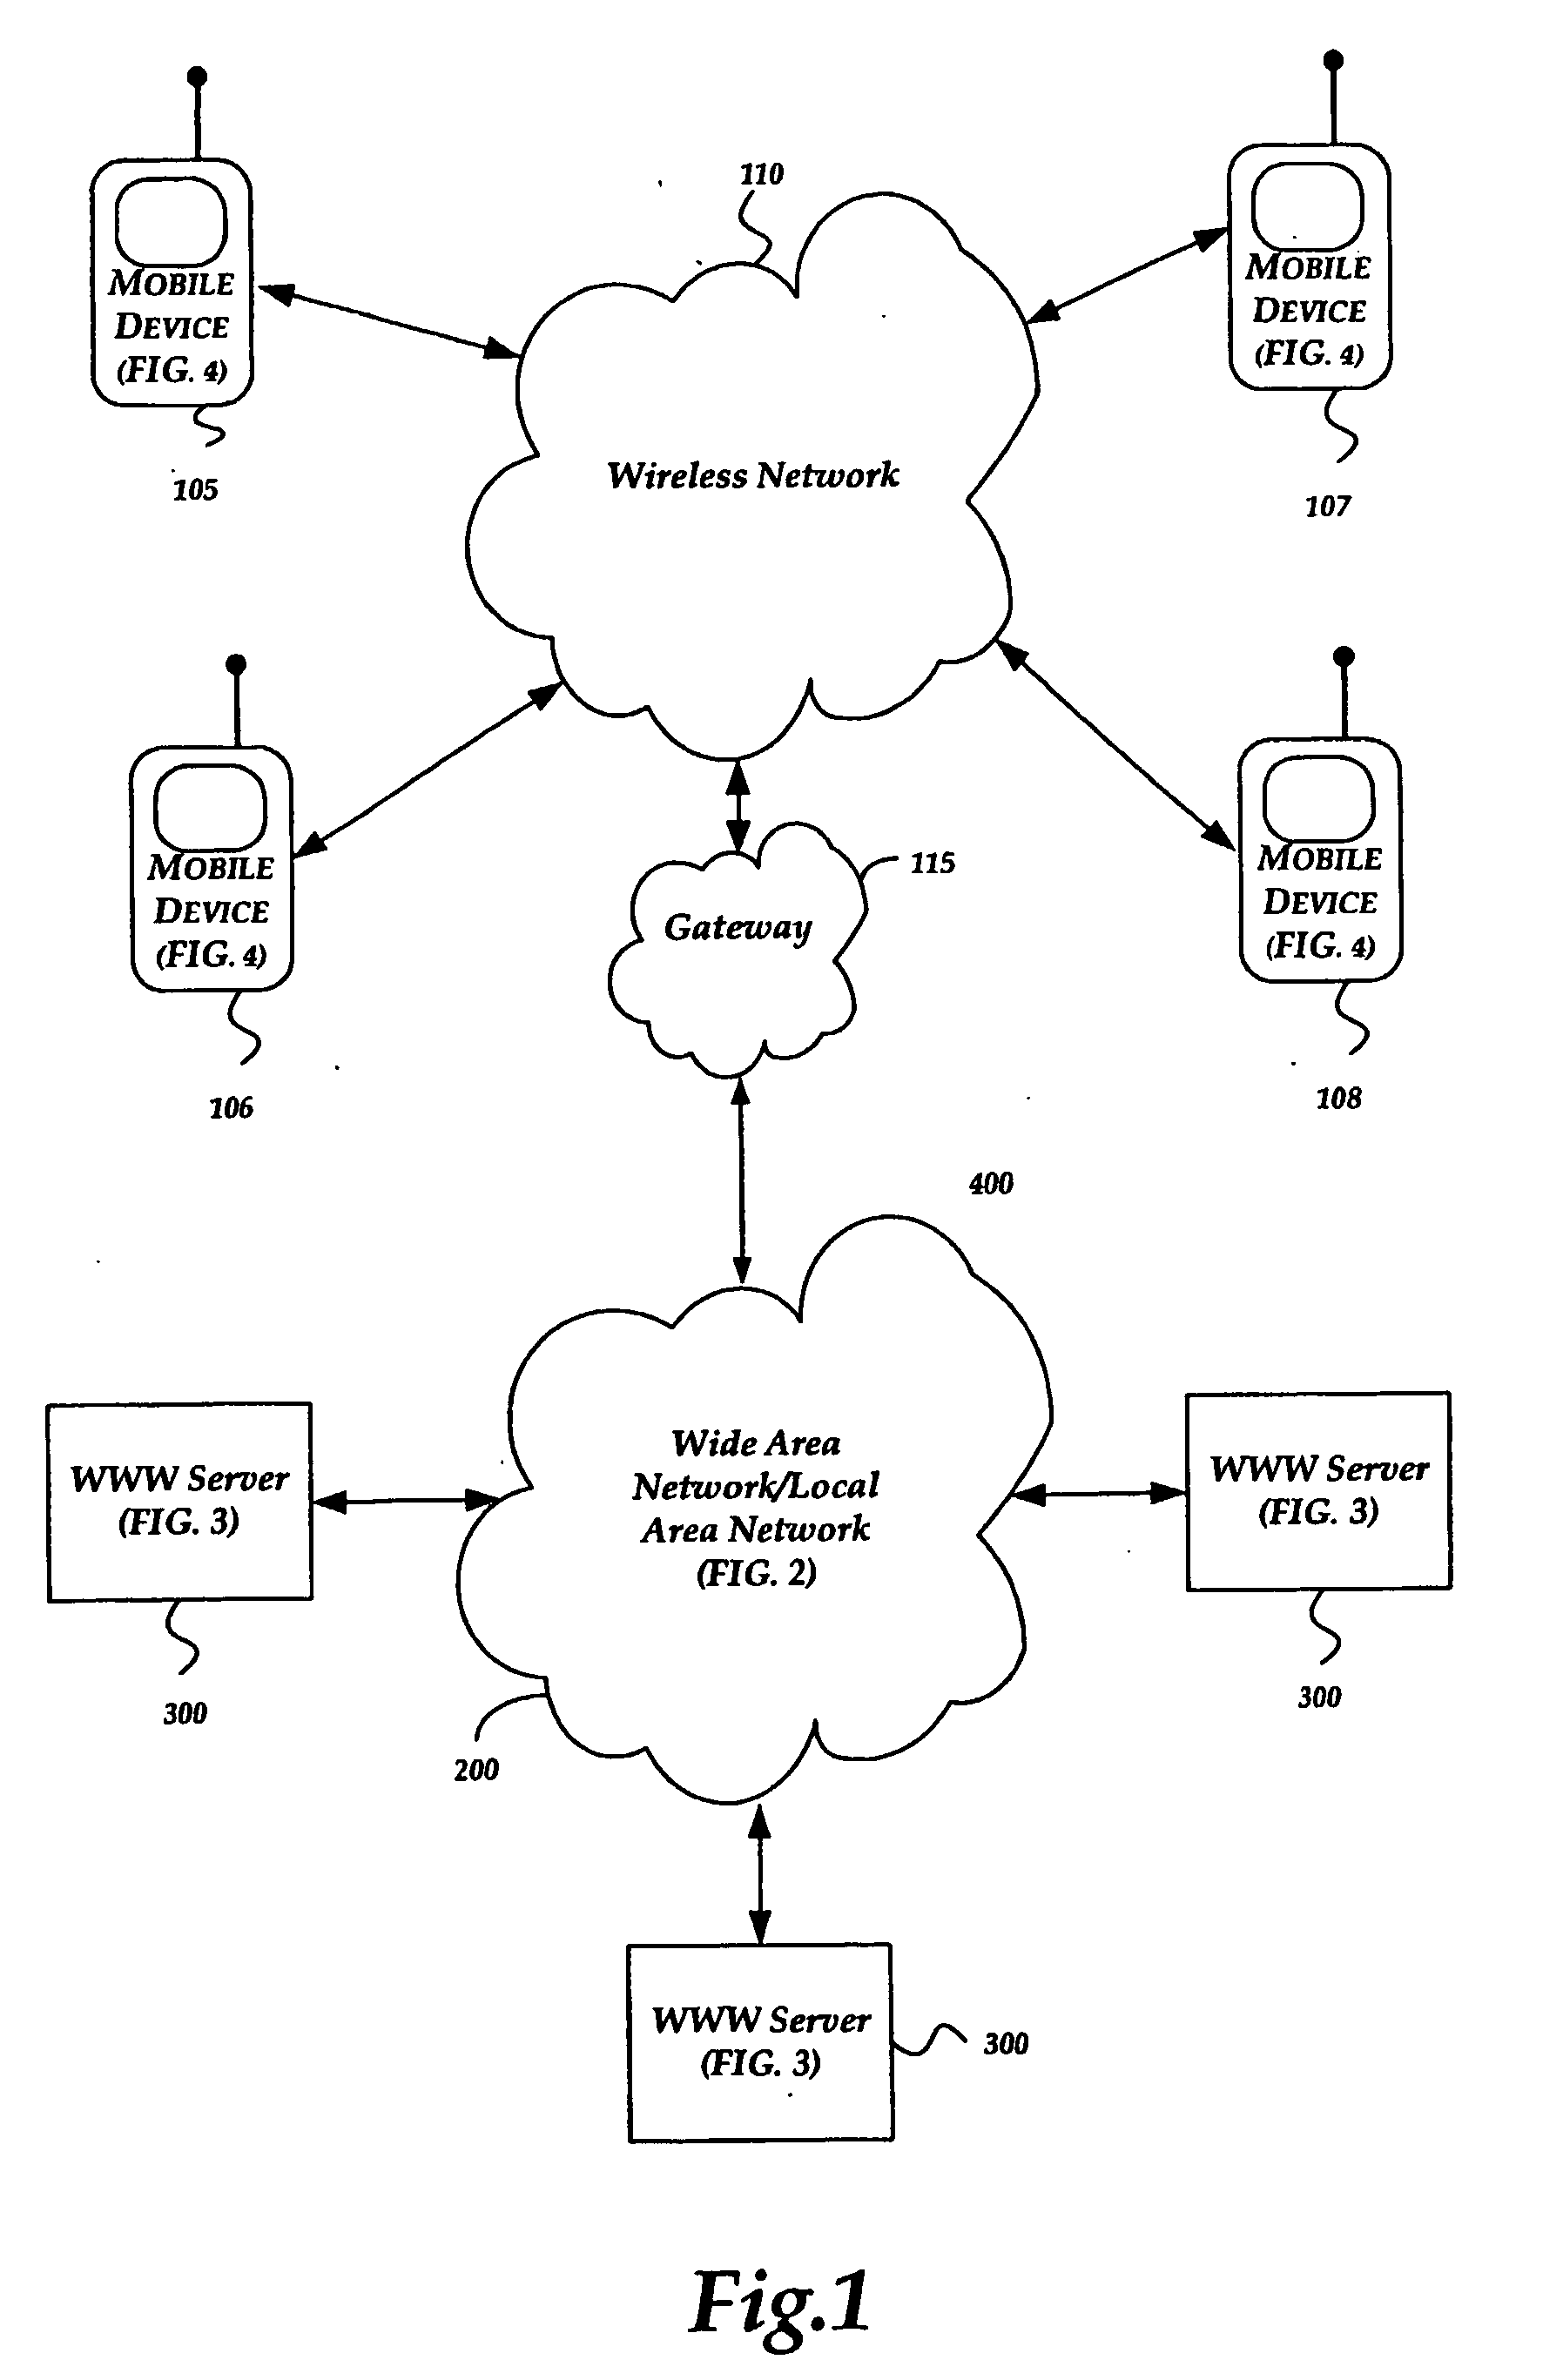 Method and system for generating and sending a hot link associated with a user interface to a device